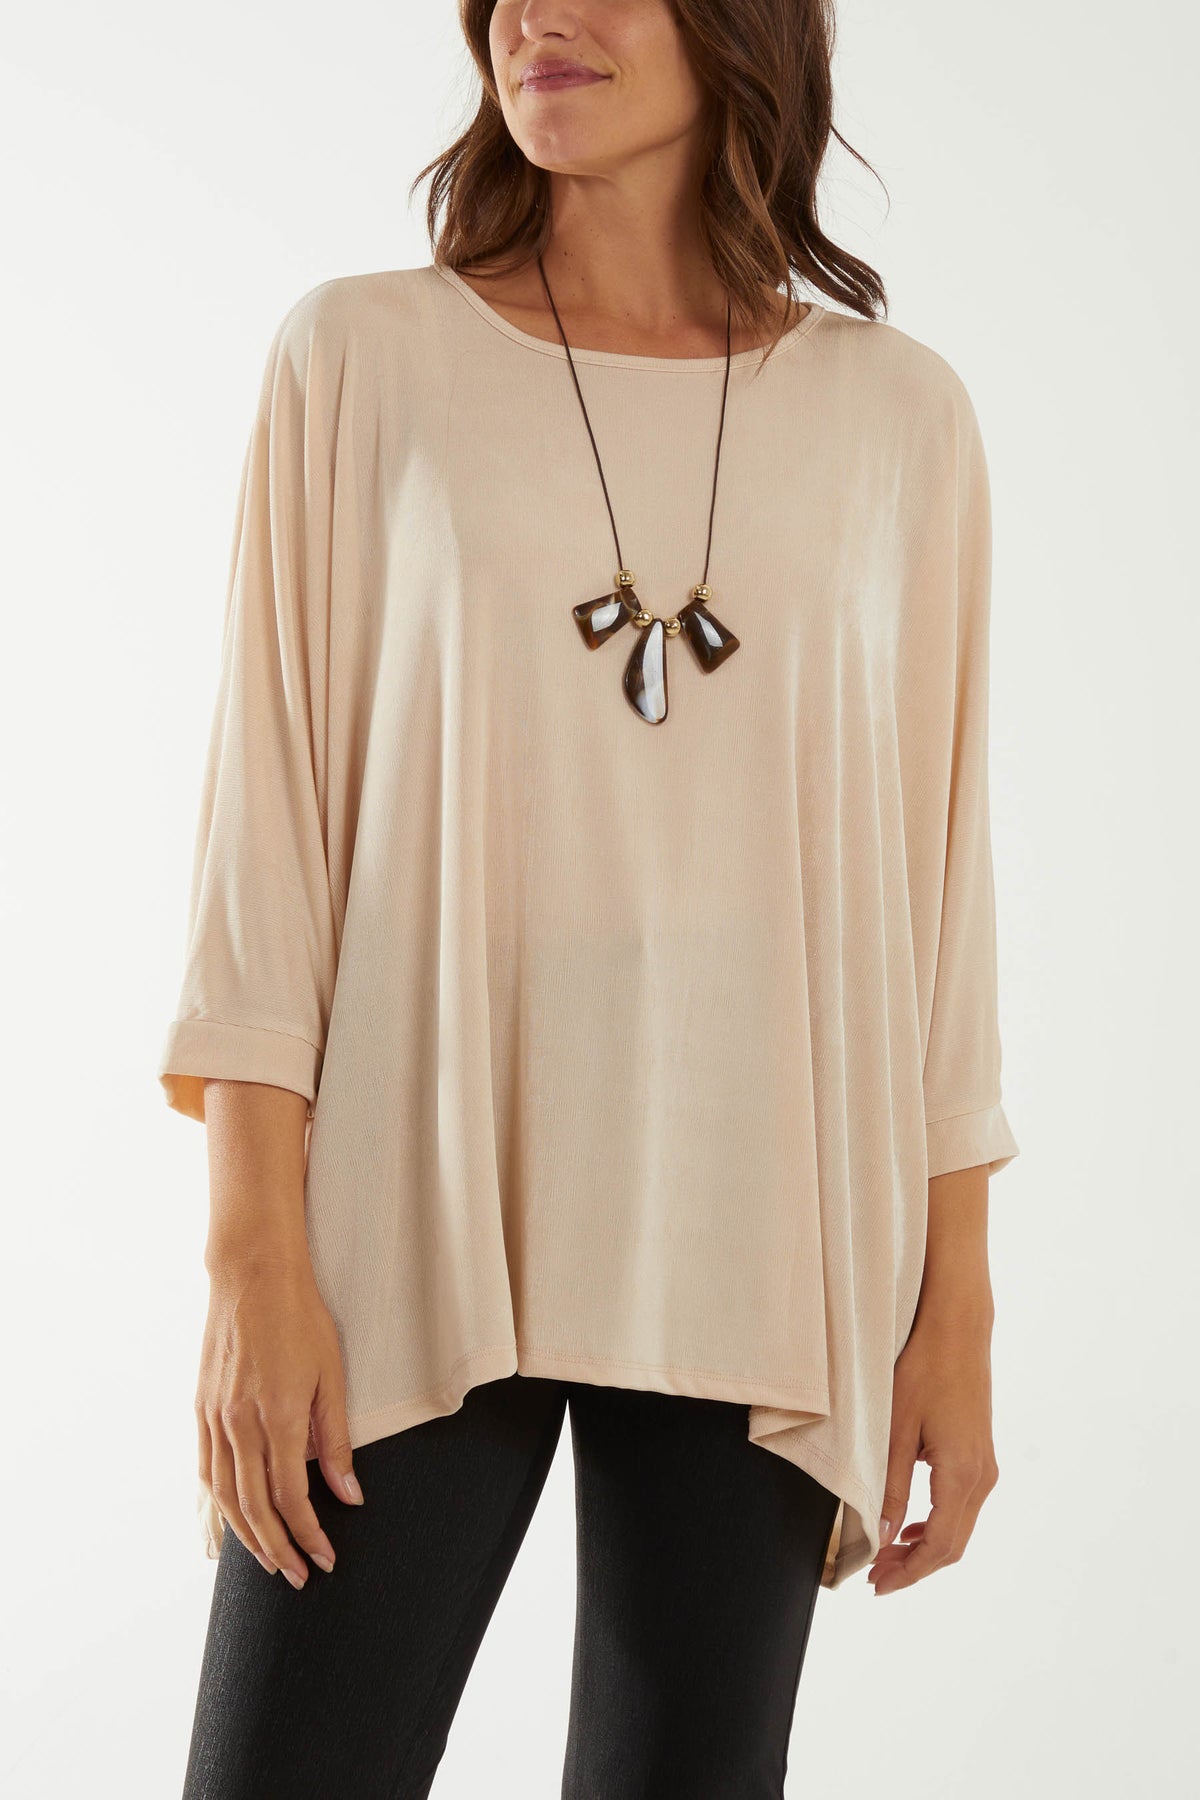 Batwing Acetate Necklace Top